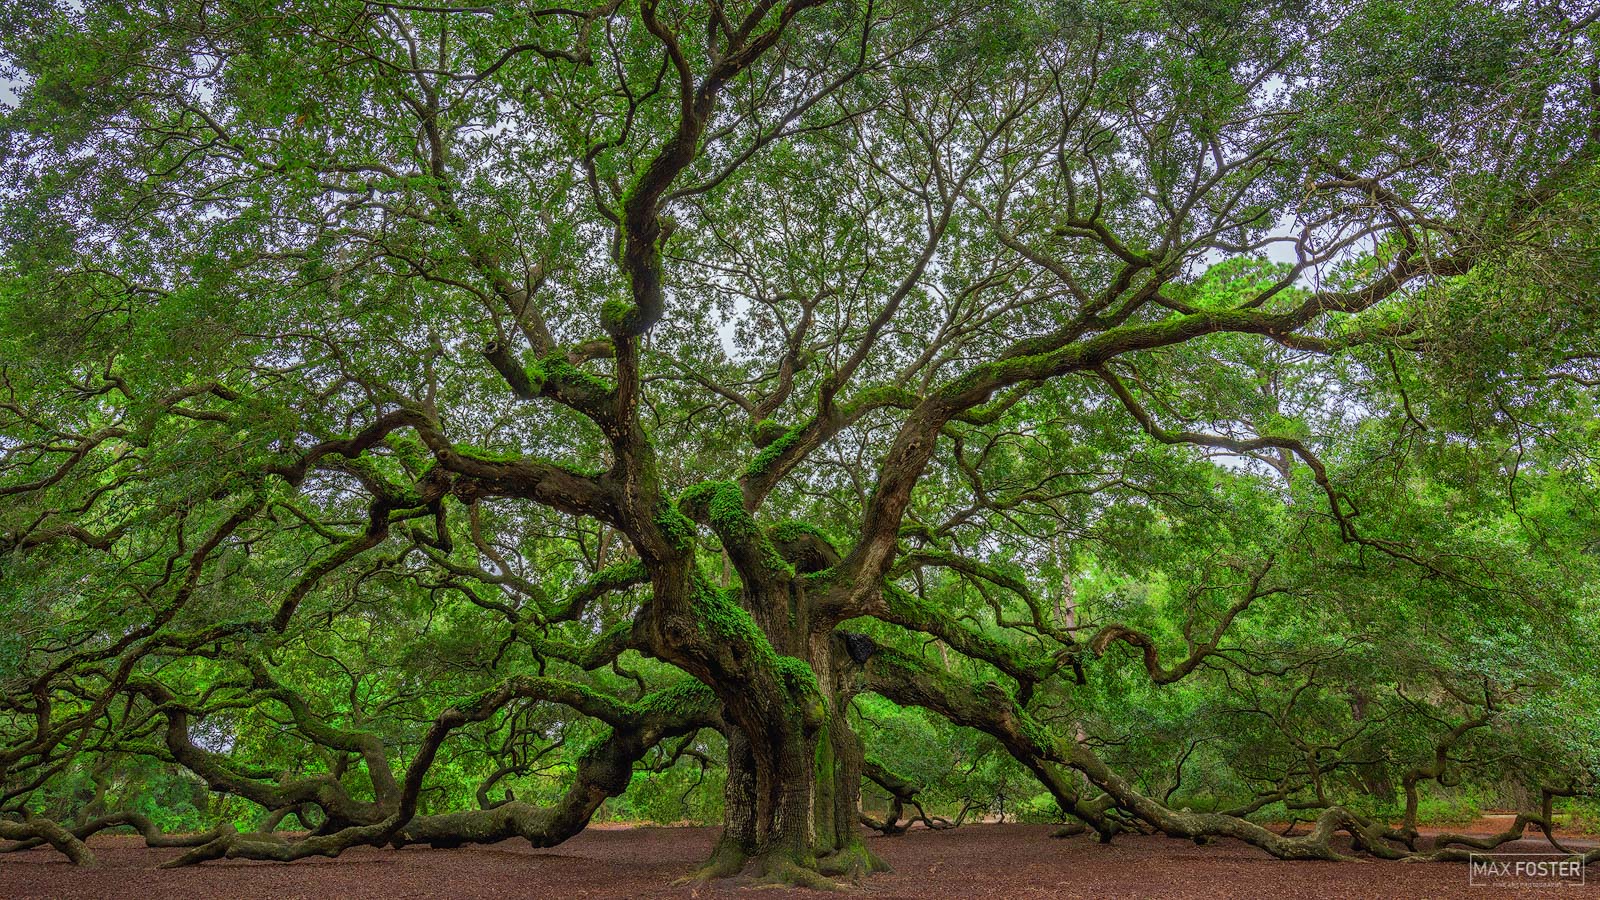 Bring your walls to life with Angel Wings, Max Foster's limited edition photography print of the famous Angel Oak in South Carolina...